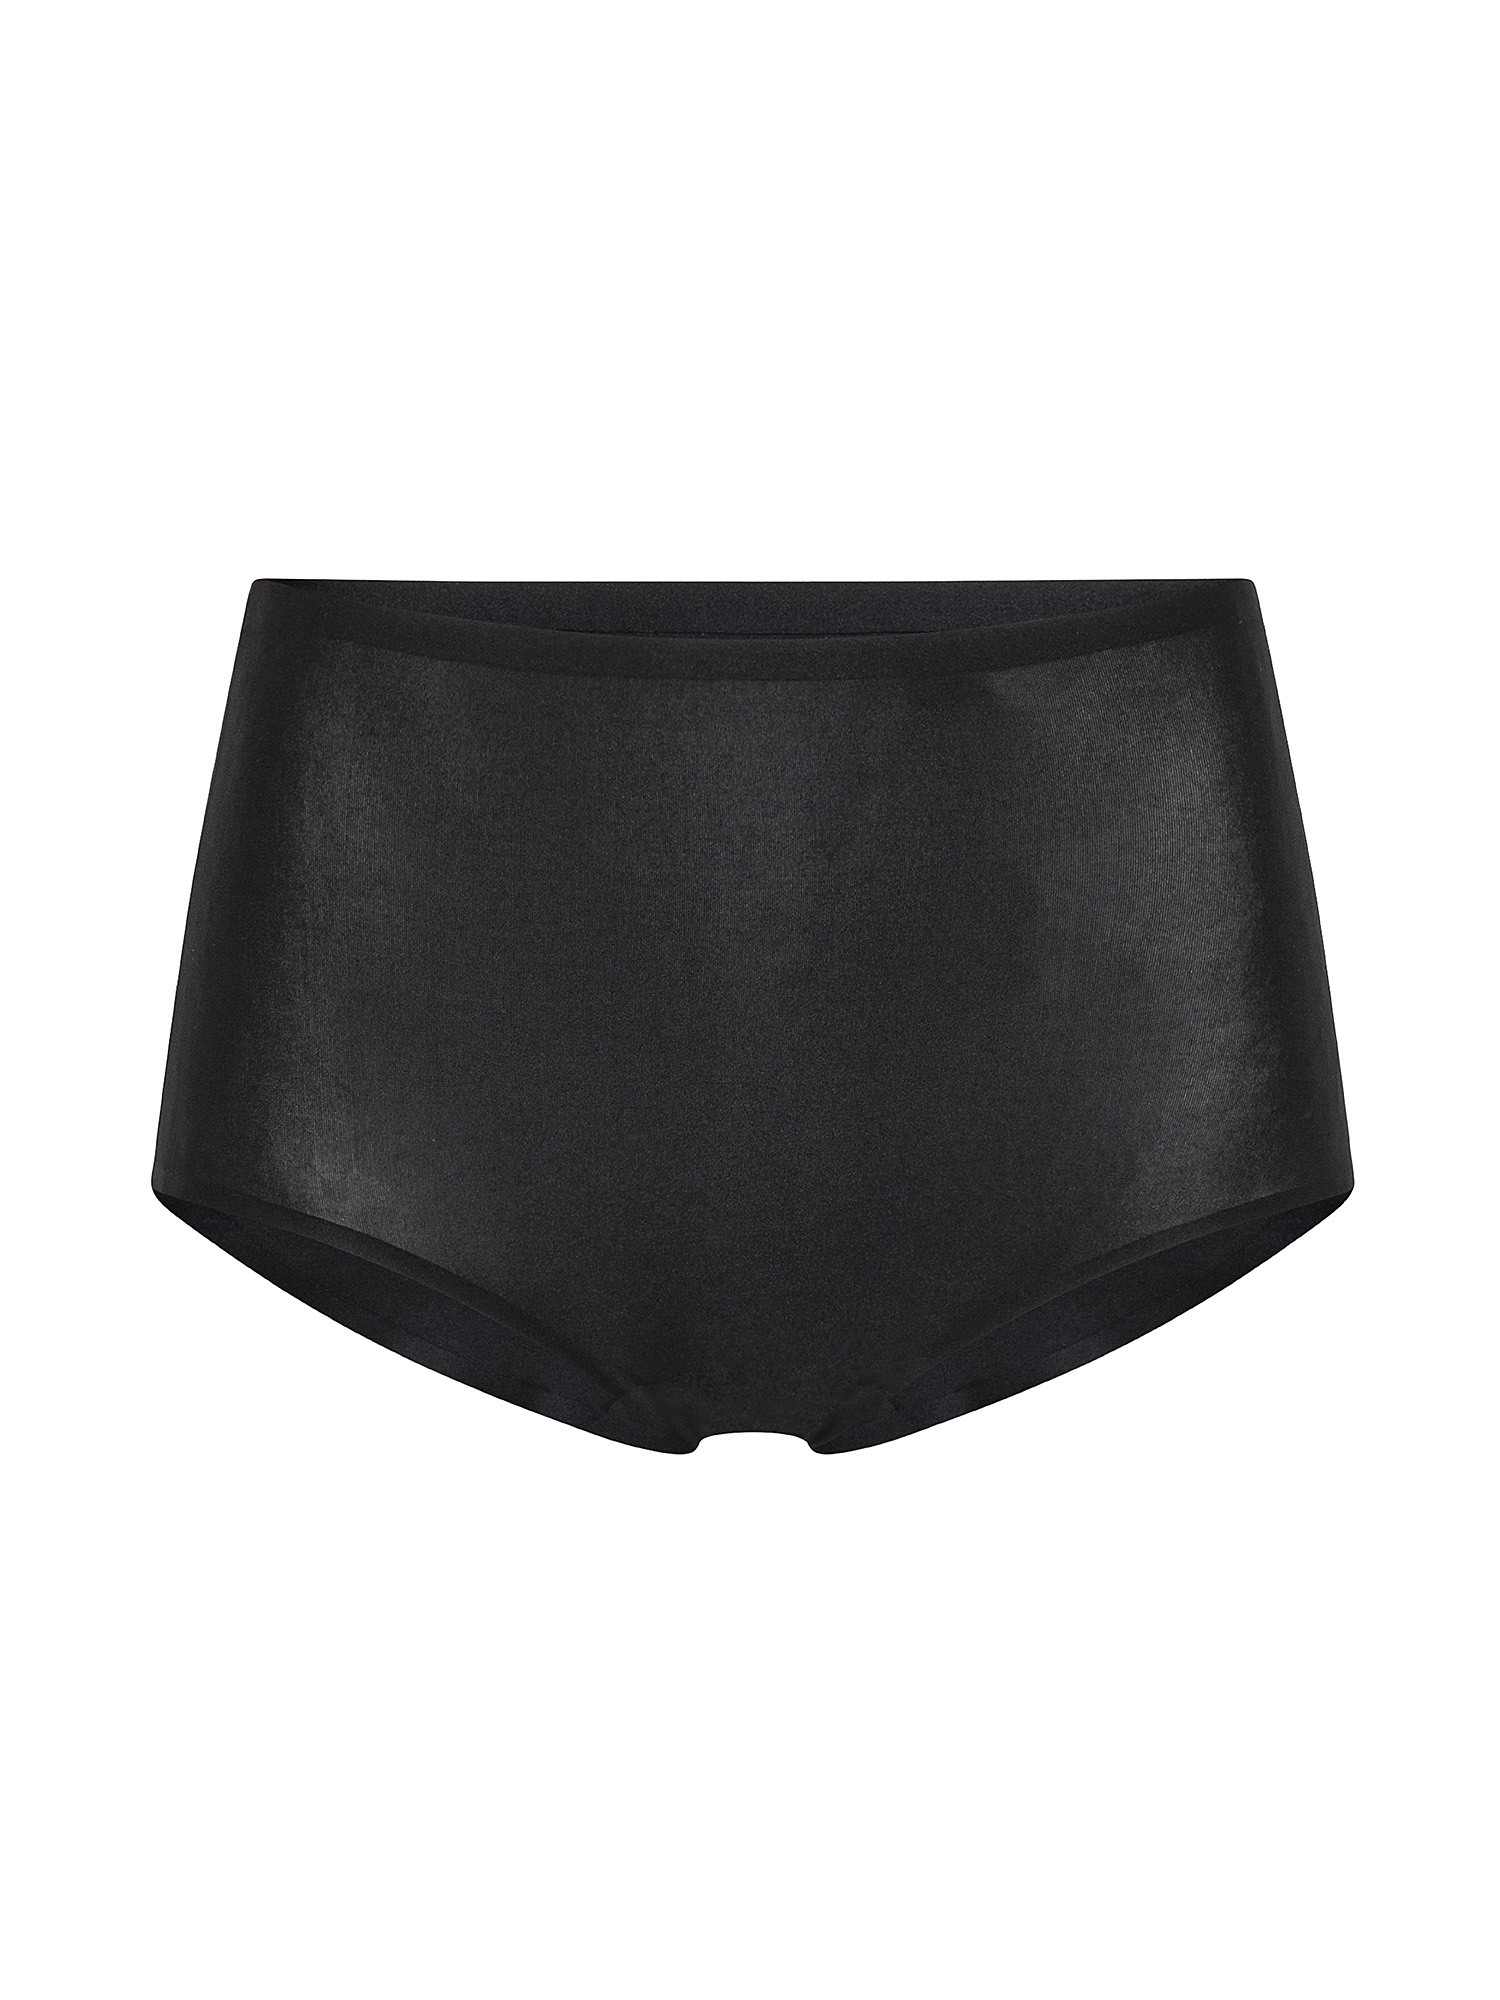 High-waisted culottes, Black, large image number 0